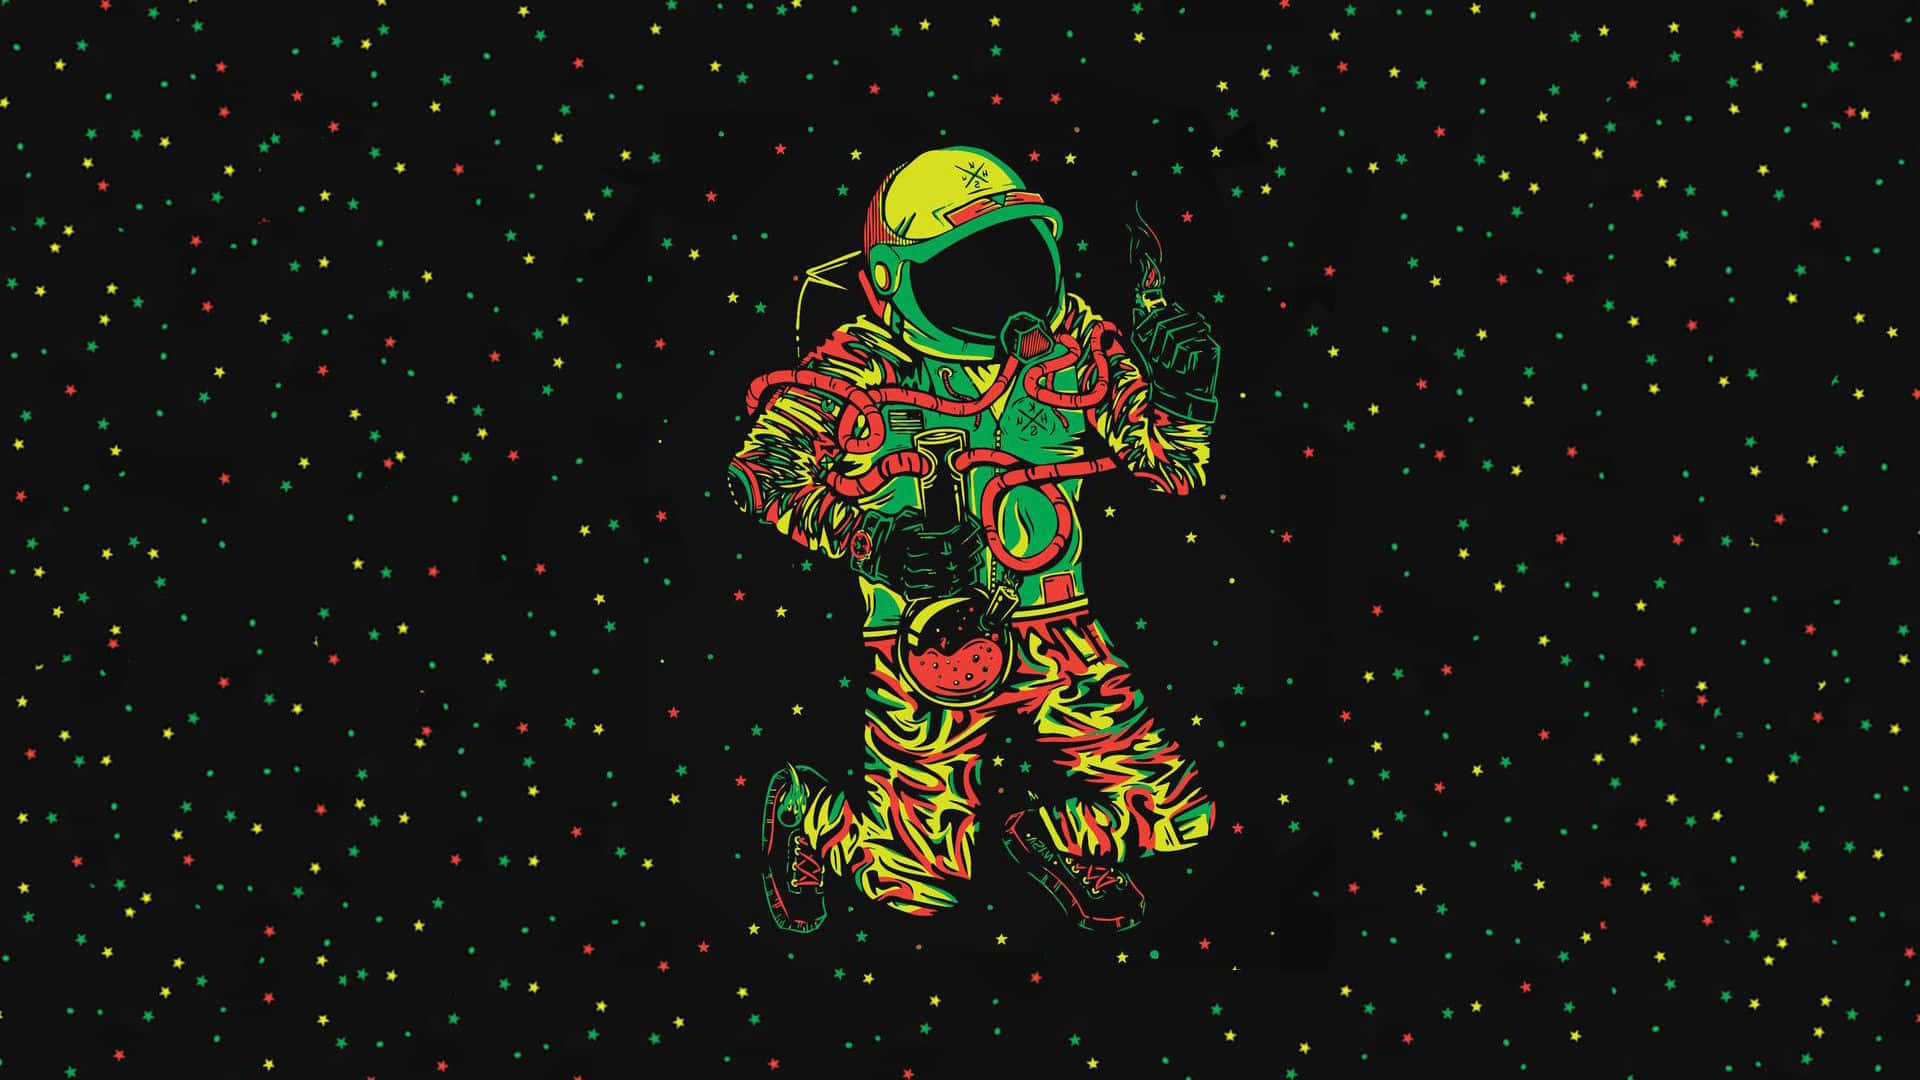 "An Amazing Astronaut Gazed Out Into the Vast Uncharted Space" Wallpaper